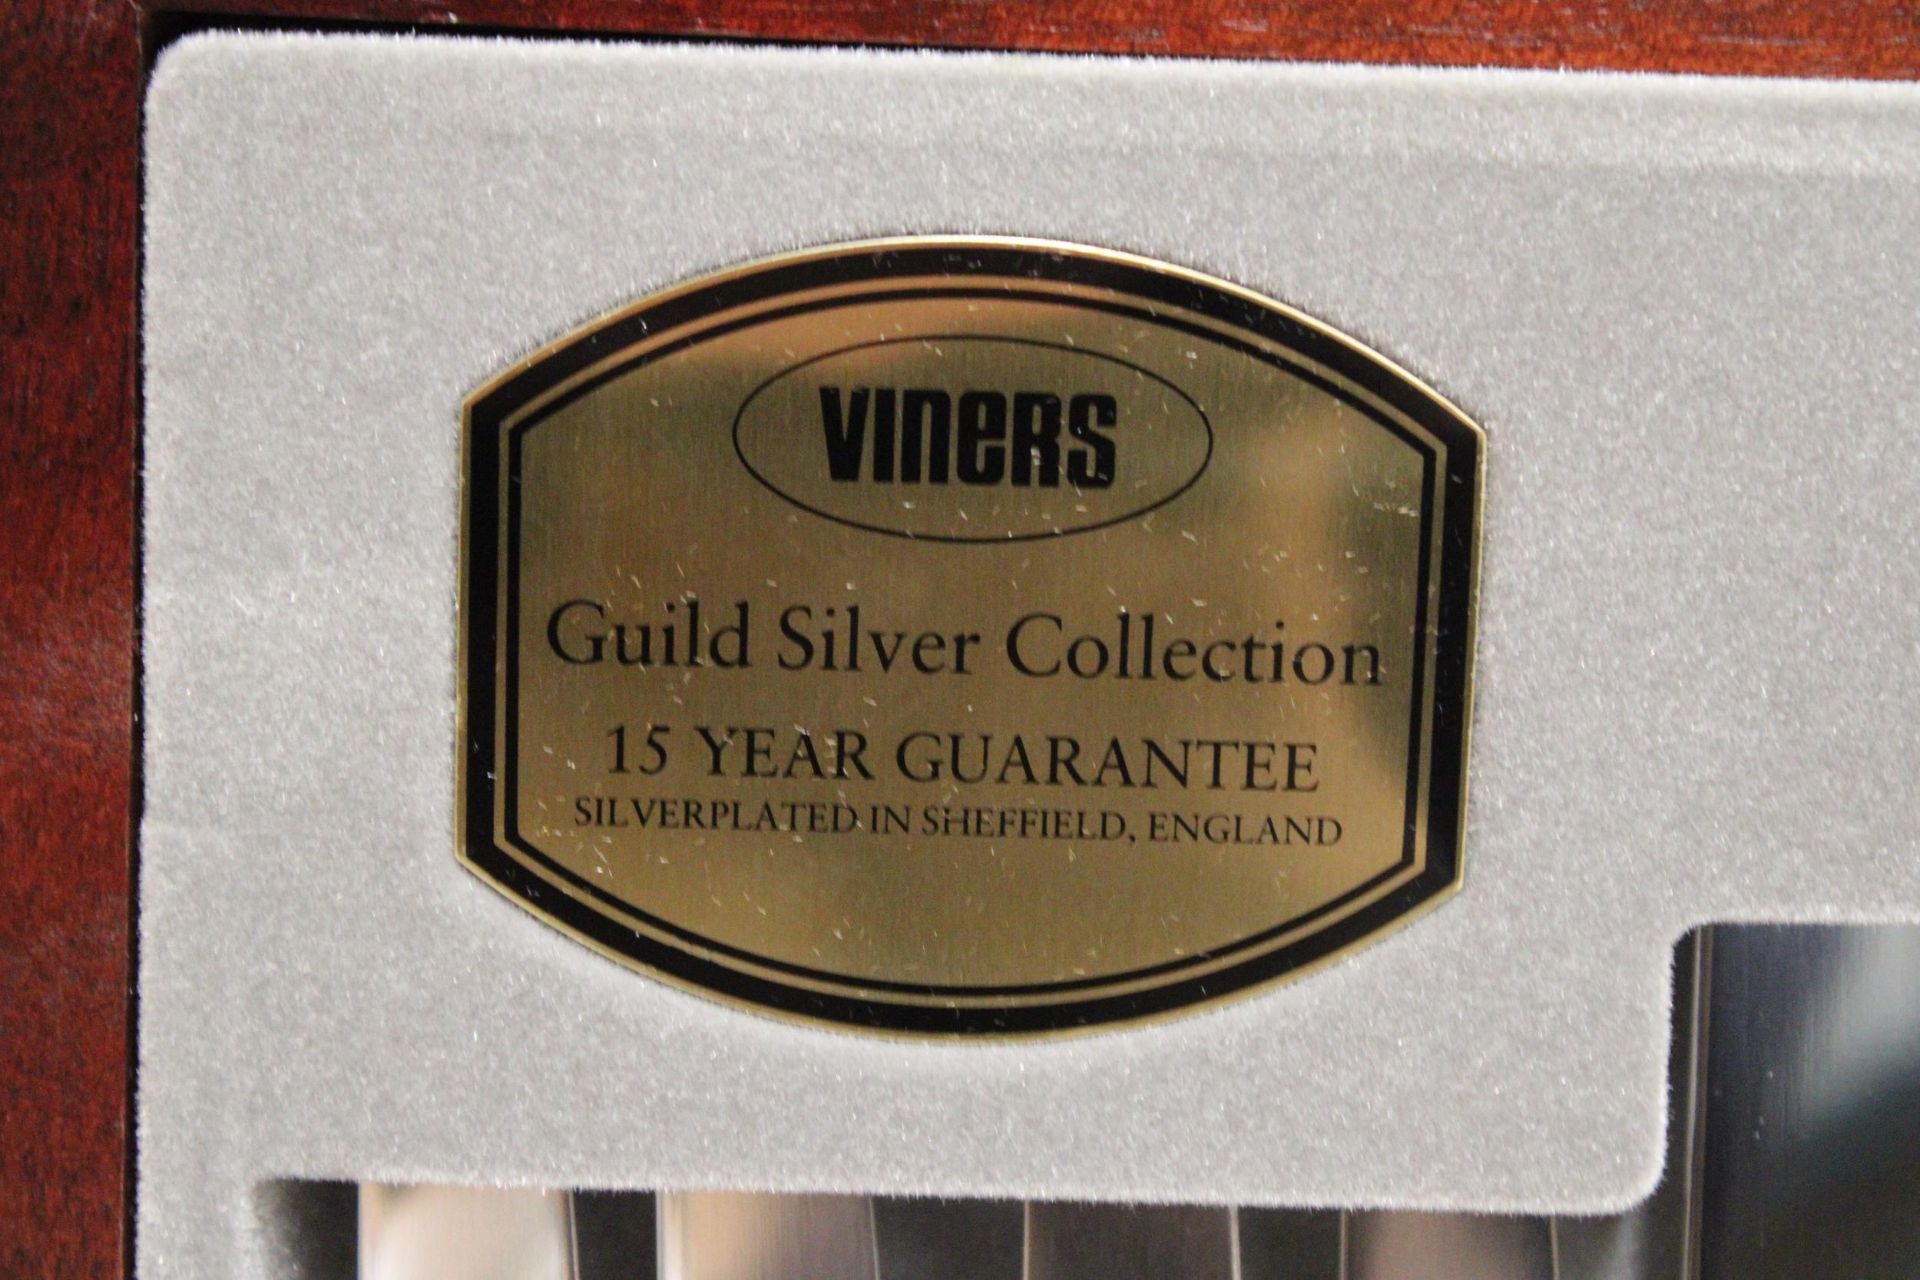 A VINERS TRADITIONAL BEAD 58 PIECE CANTEEN OF CUTLERY FOR 8 PERSONS GUILD SILVER COLLECTION IN CASED - Image 8 of 9